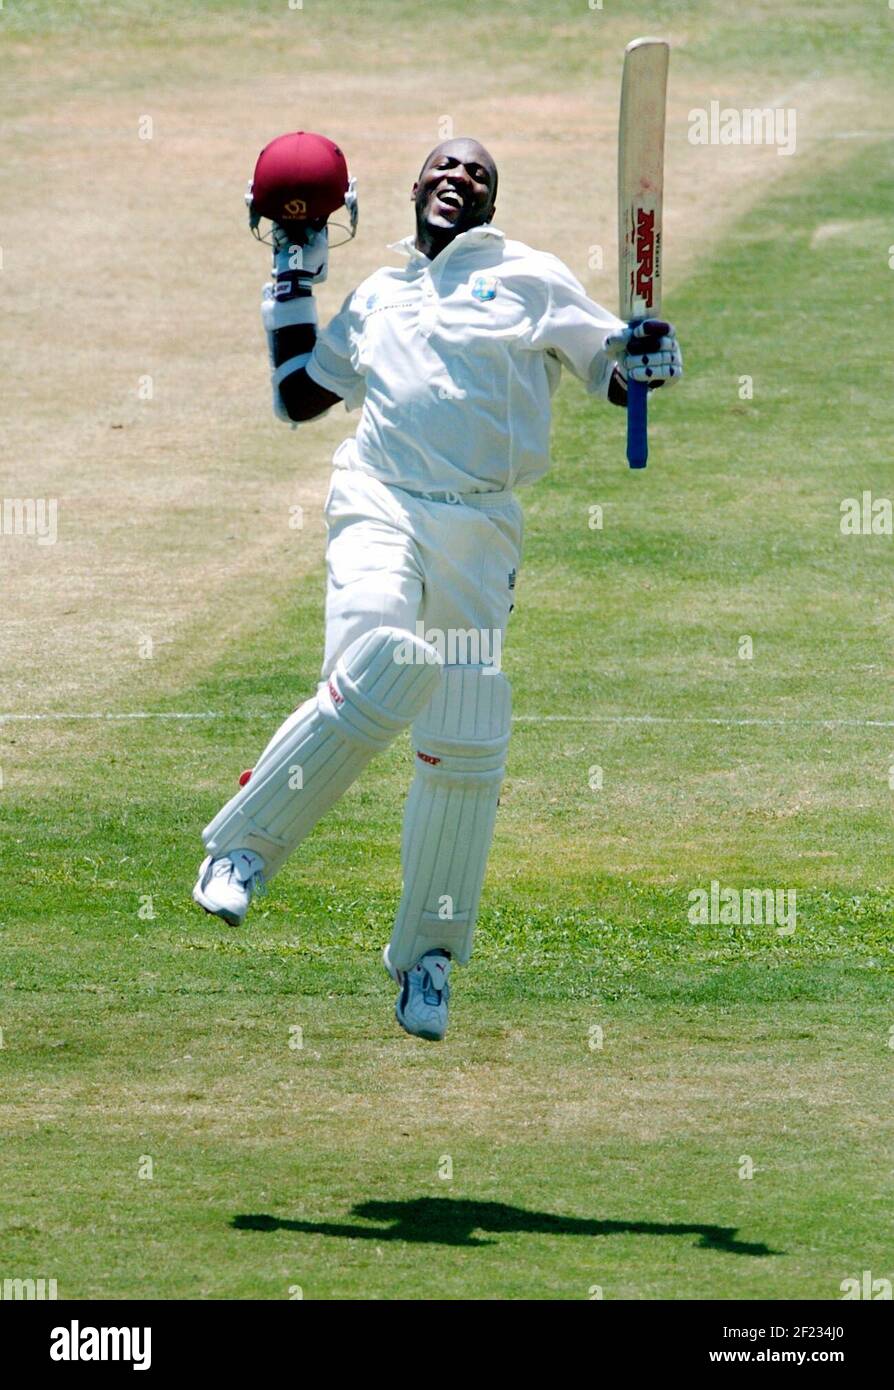 4th TEST 3rd DAY ENGLAND V WEST INDIES   AT THE RECCREATION GROUND ANTIGUA 12/4/2004 BRIAN LARA AFTER SCORING 400 TO BREAKING THE WORLD RECORD TEST SCORE  PICTURE DAVID ASHDOWN Stock Photo